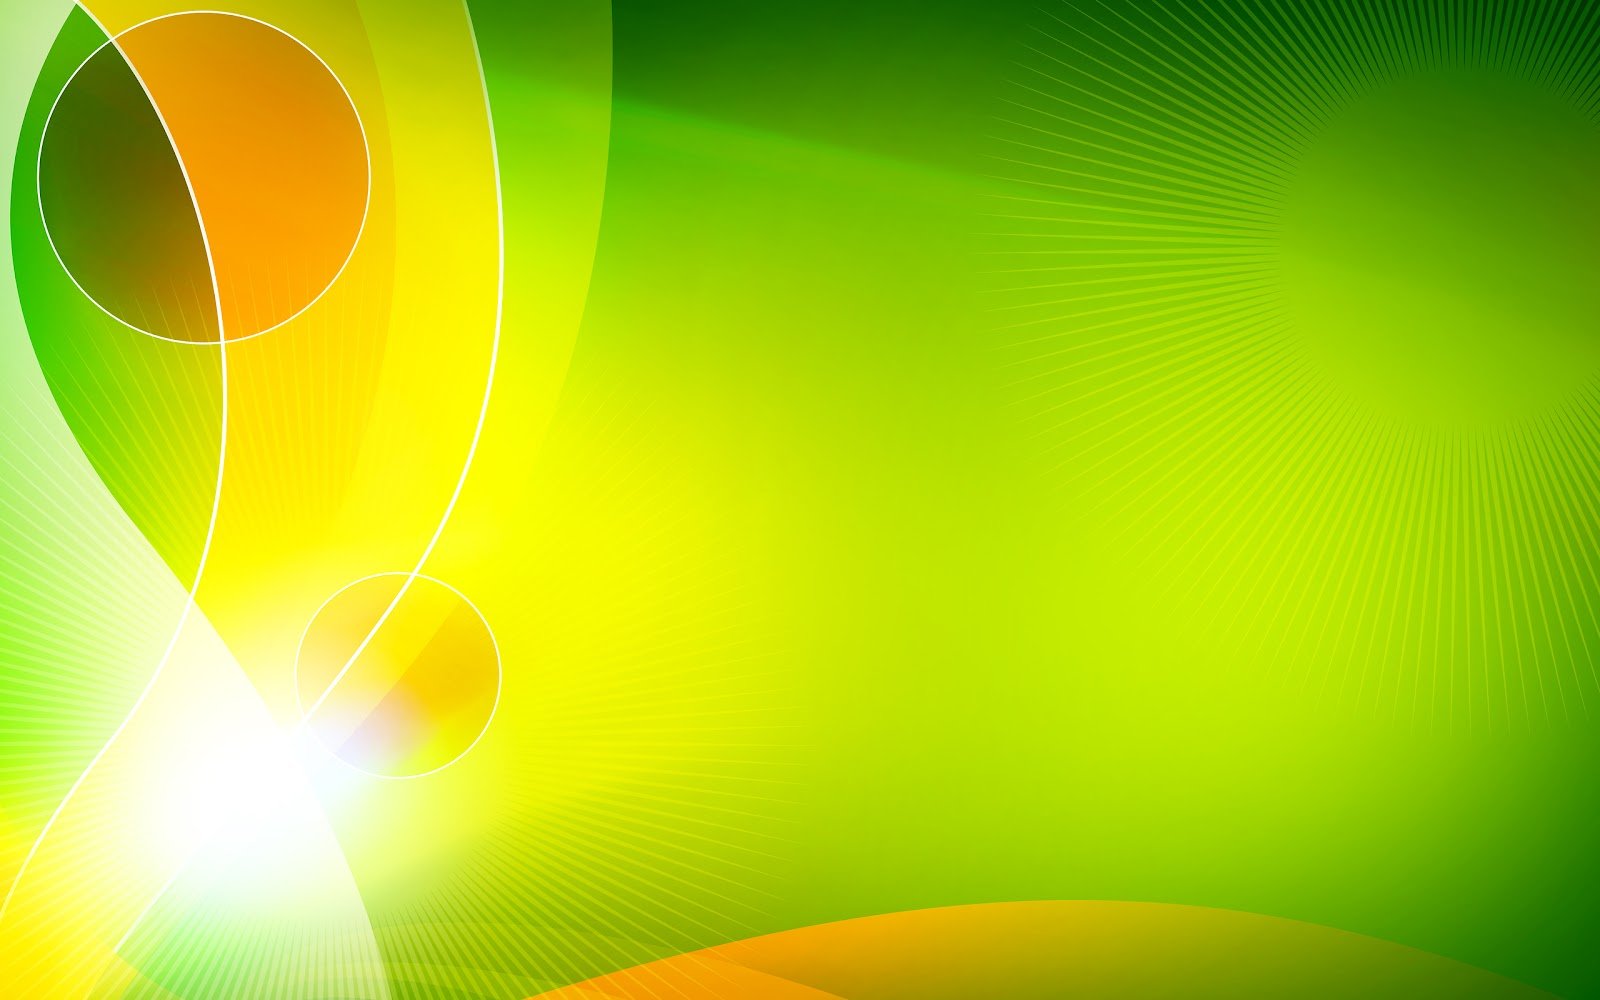 Orange And Green Glowing Lines Abstract Mobile Wallpaper Green Wallpapers   फट शयर